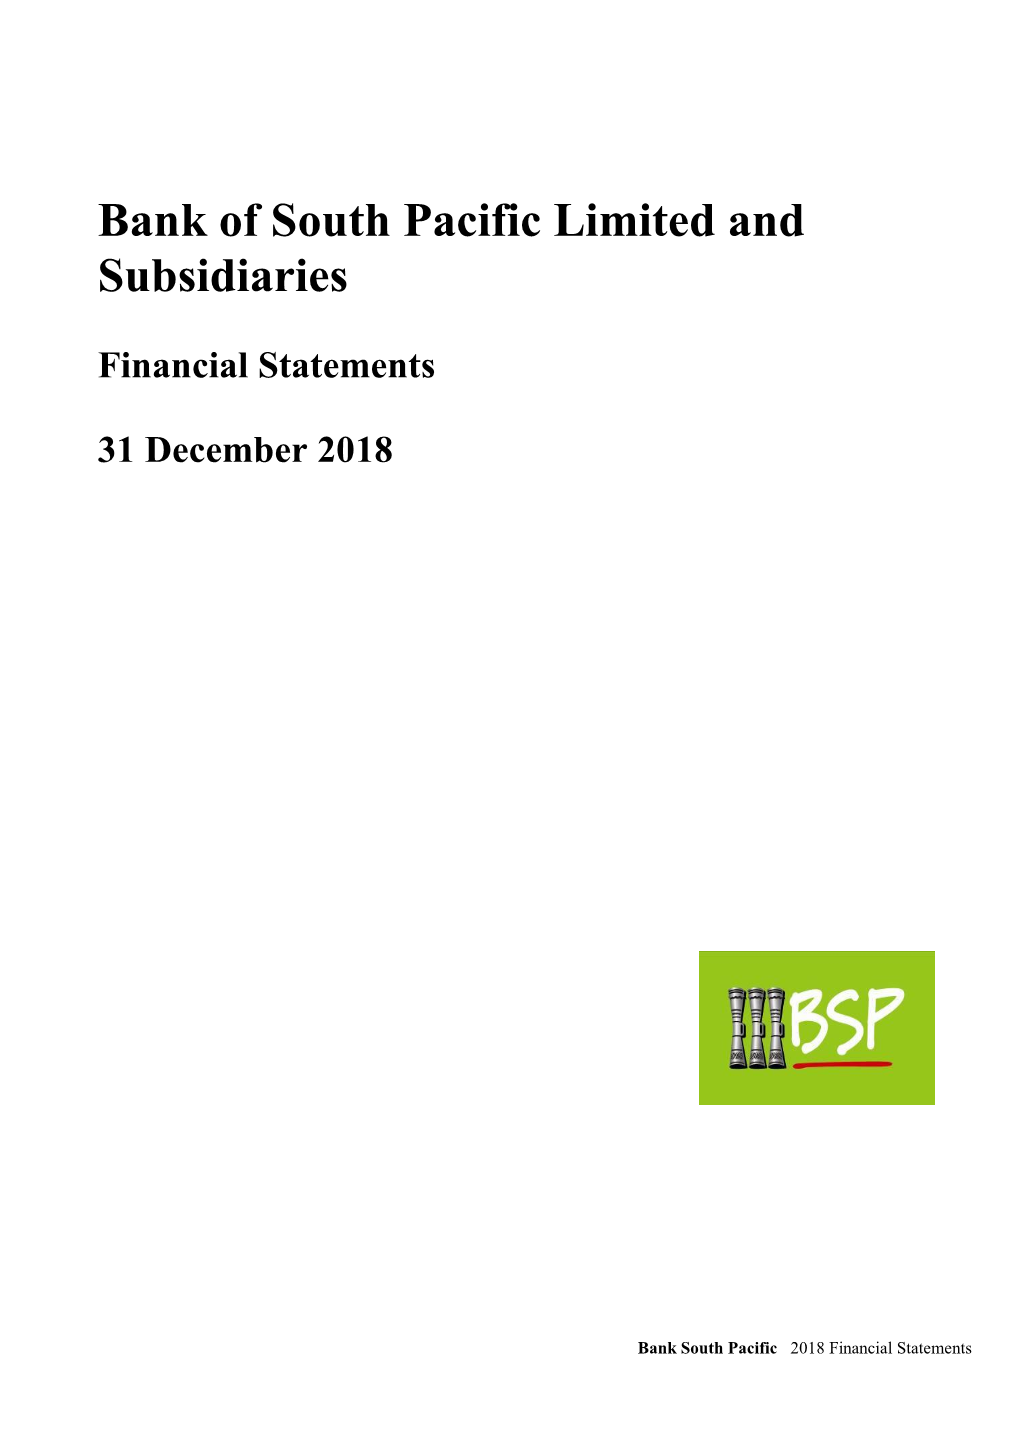 Bank of South Pacific Limited and Subsidiaries